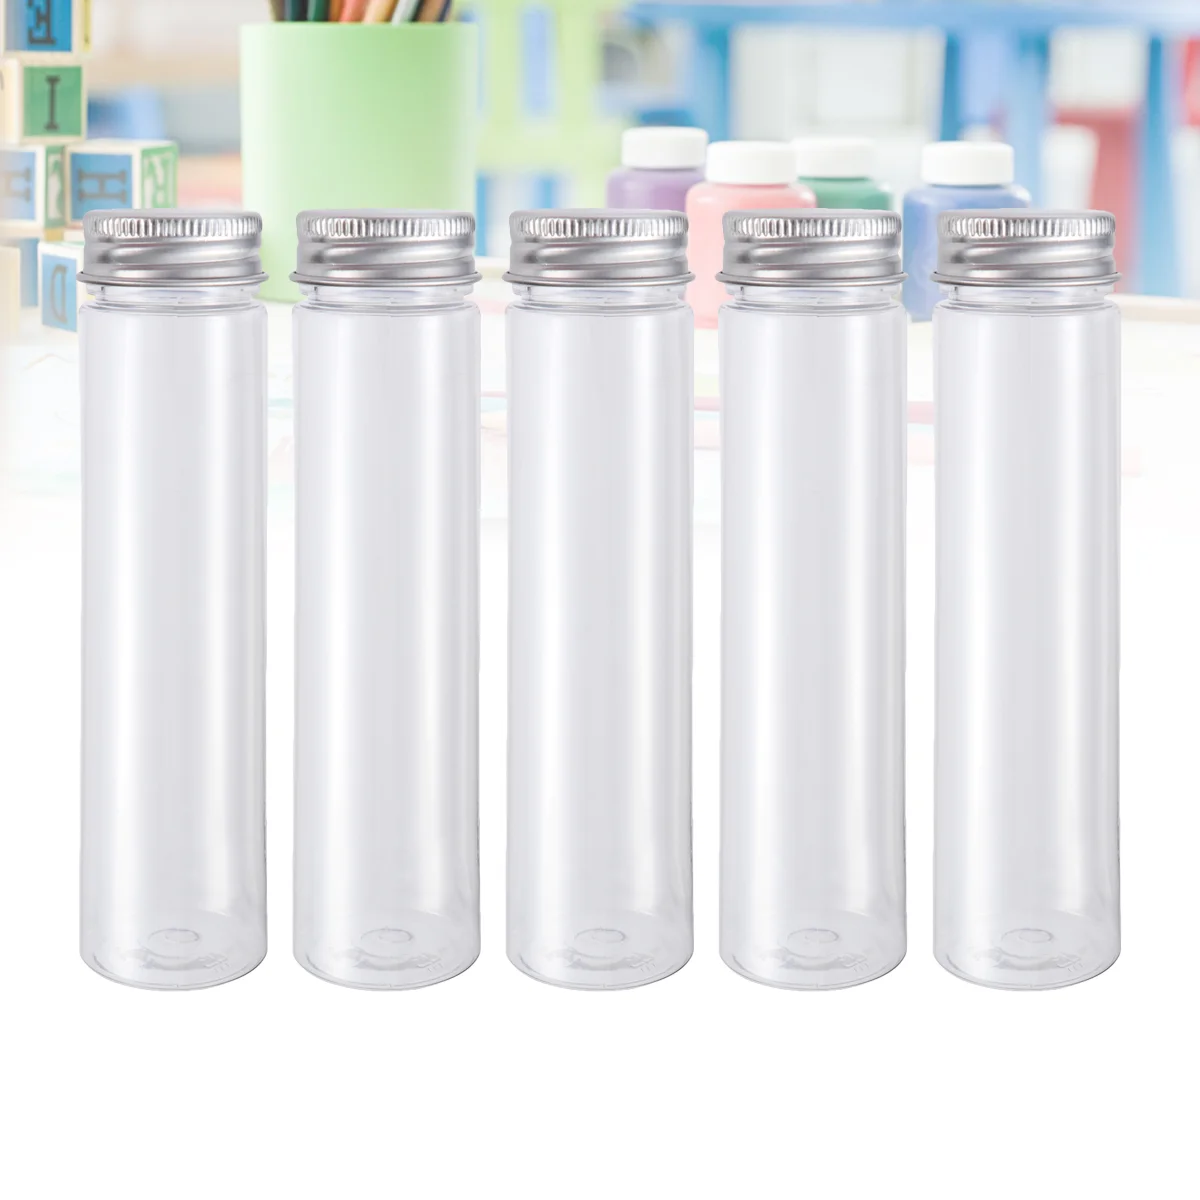 

Flat-Bottomed Plastic Clear Test Tubes With Screw Caps Candy Cosmetic Travel Lotion Containers